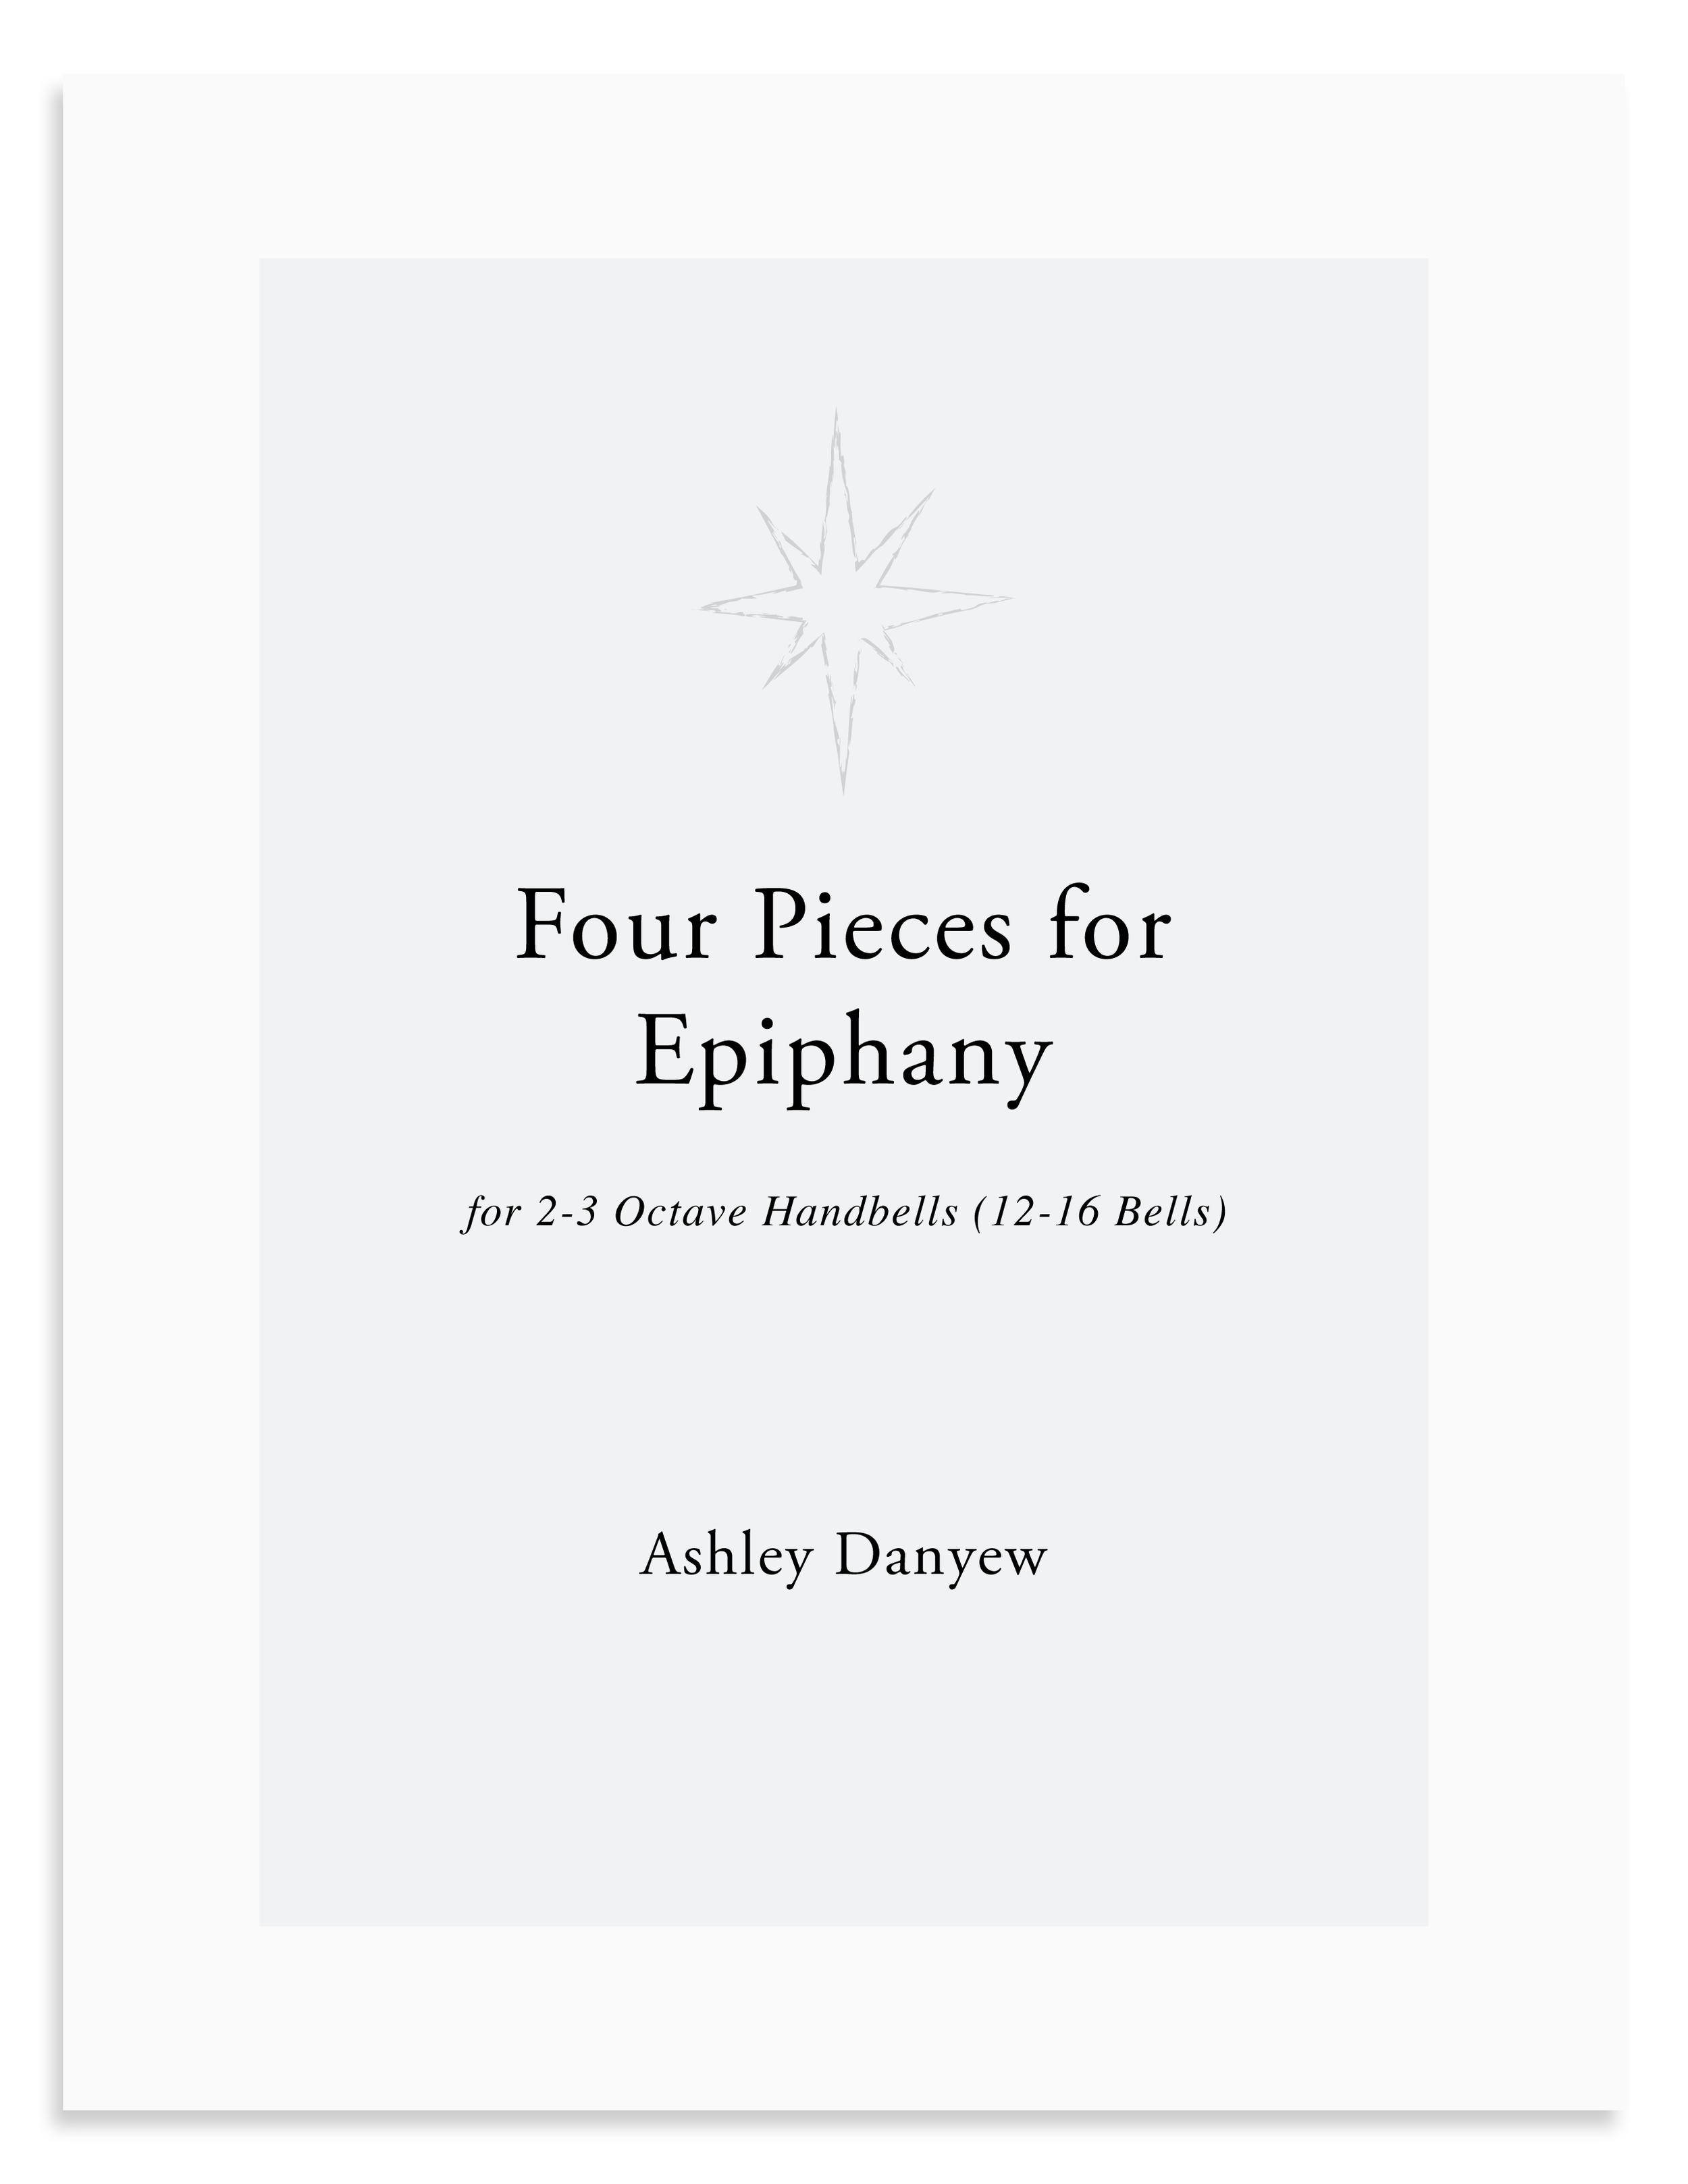 Four Pieces for Epiphany: A New Handbell Collection